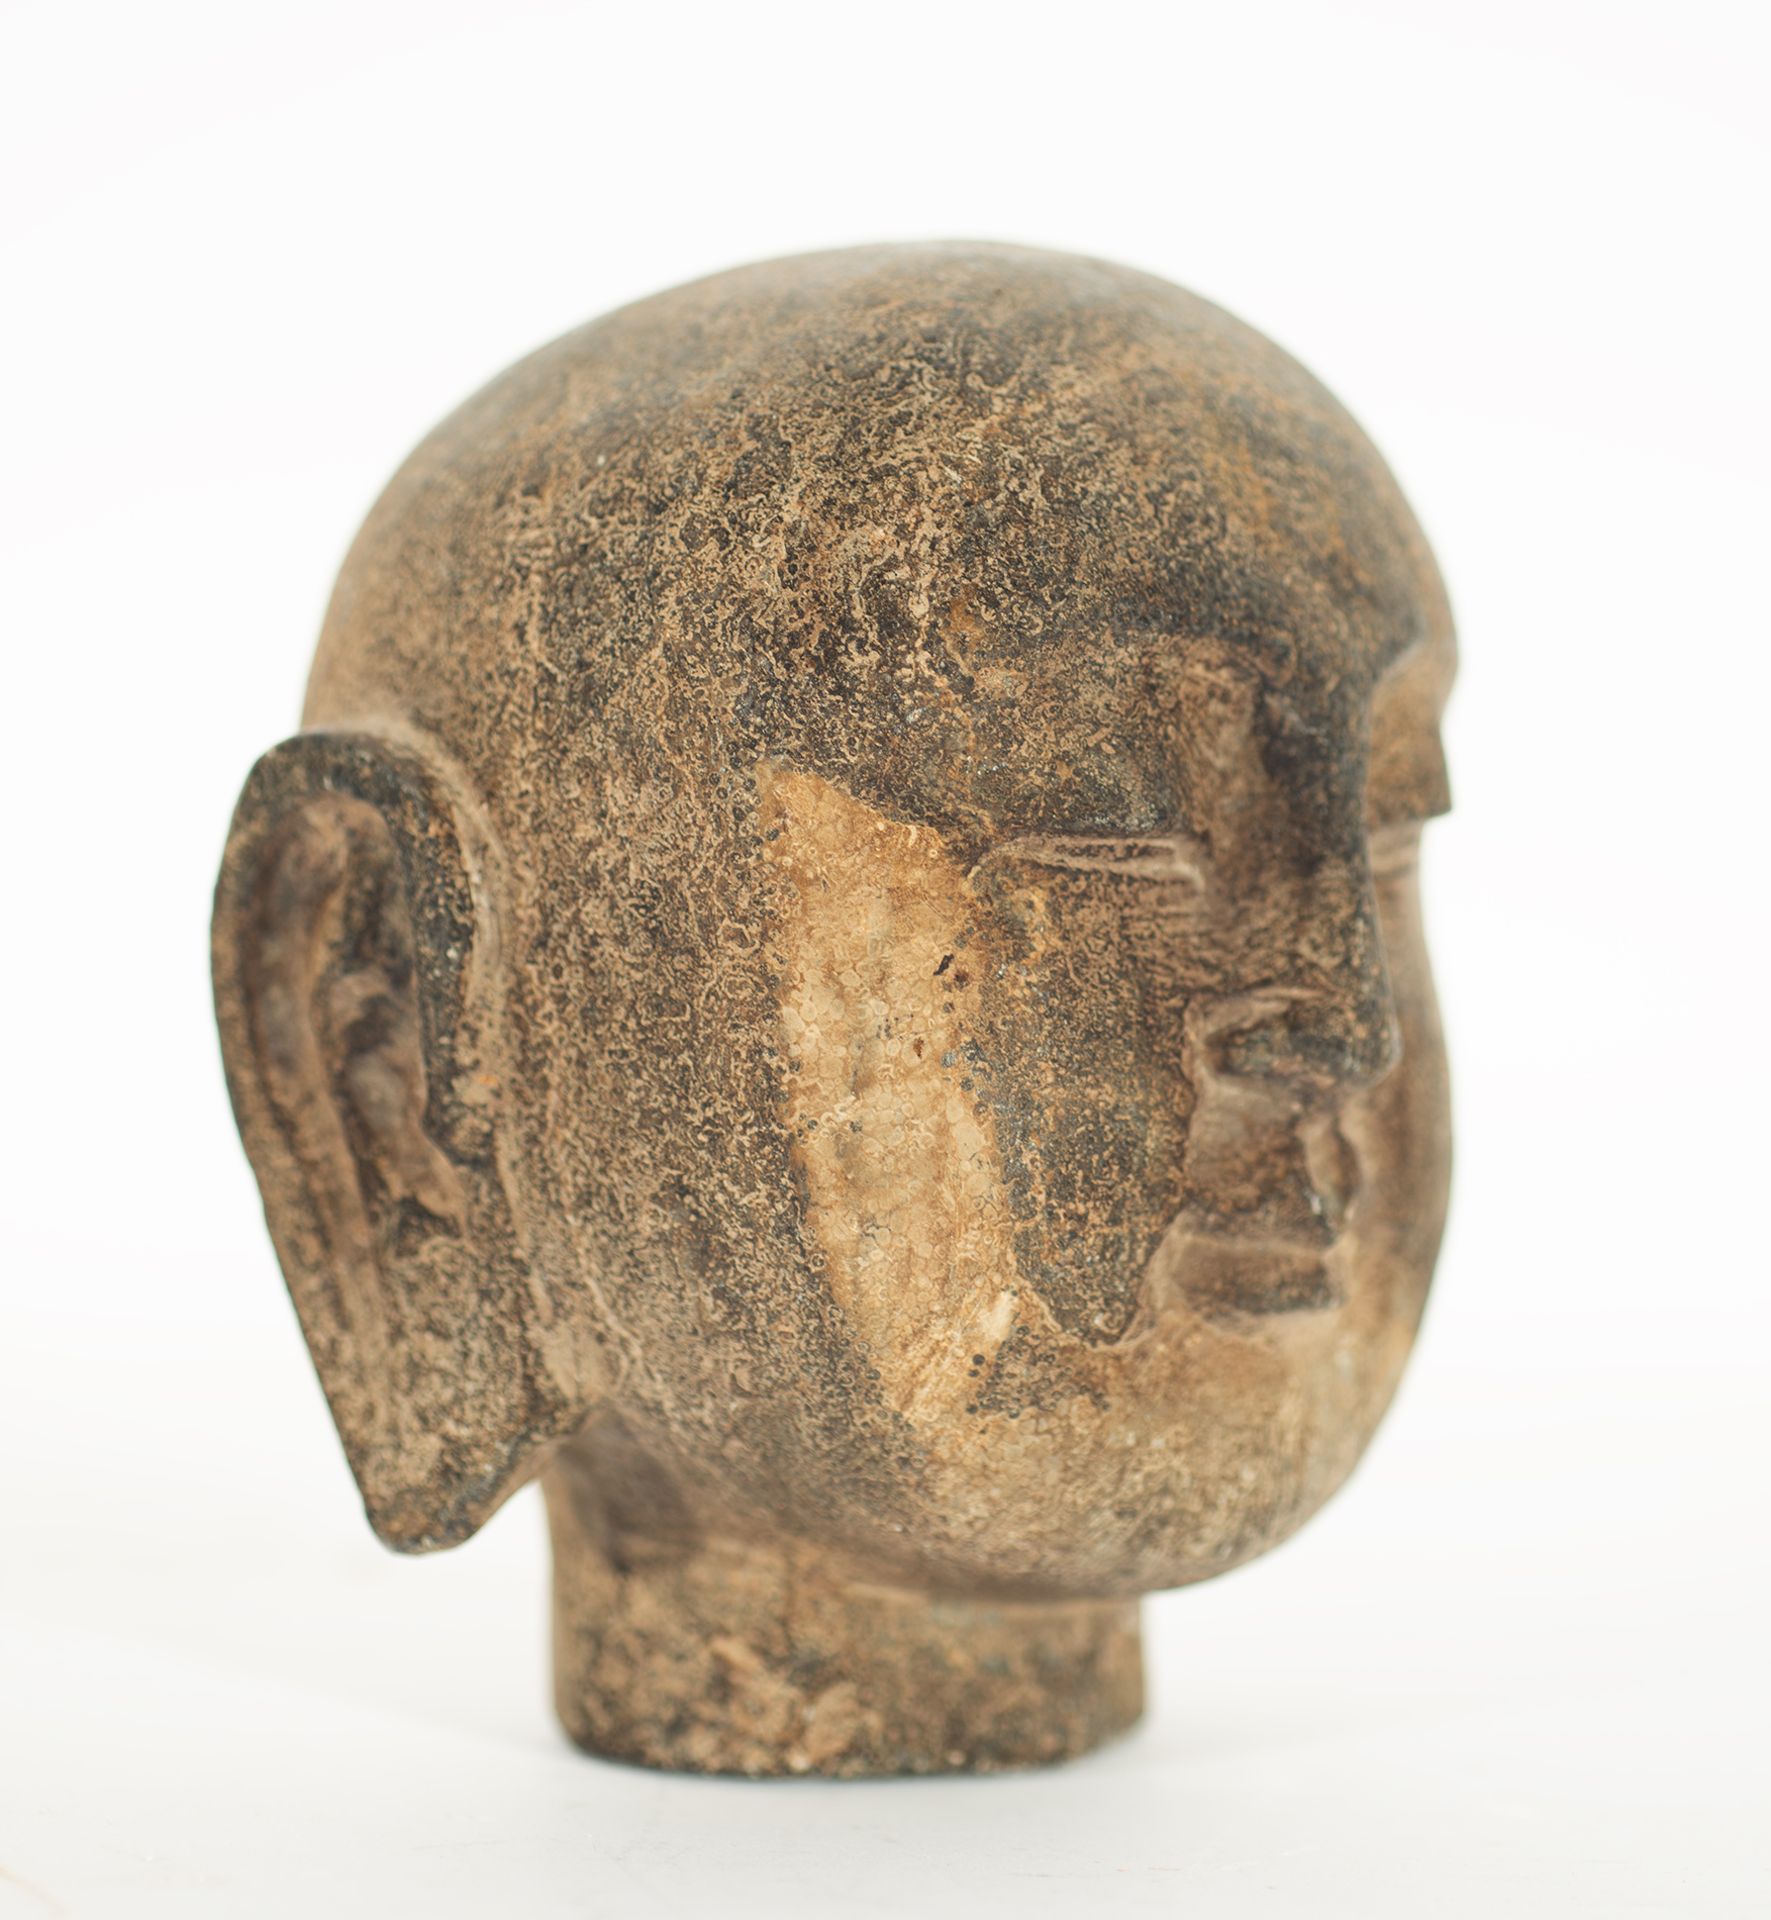 Buddha head, China, possibly Ming period, 16th - 17th century - Image 4 of 5